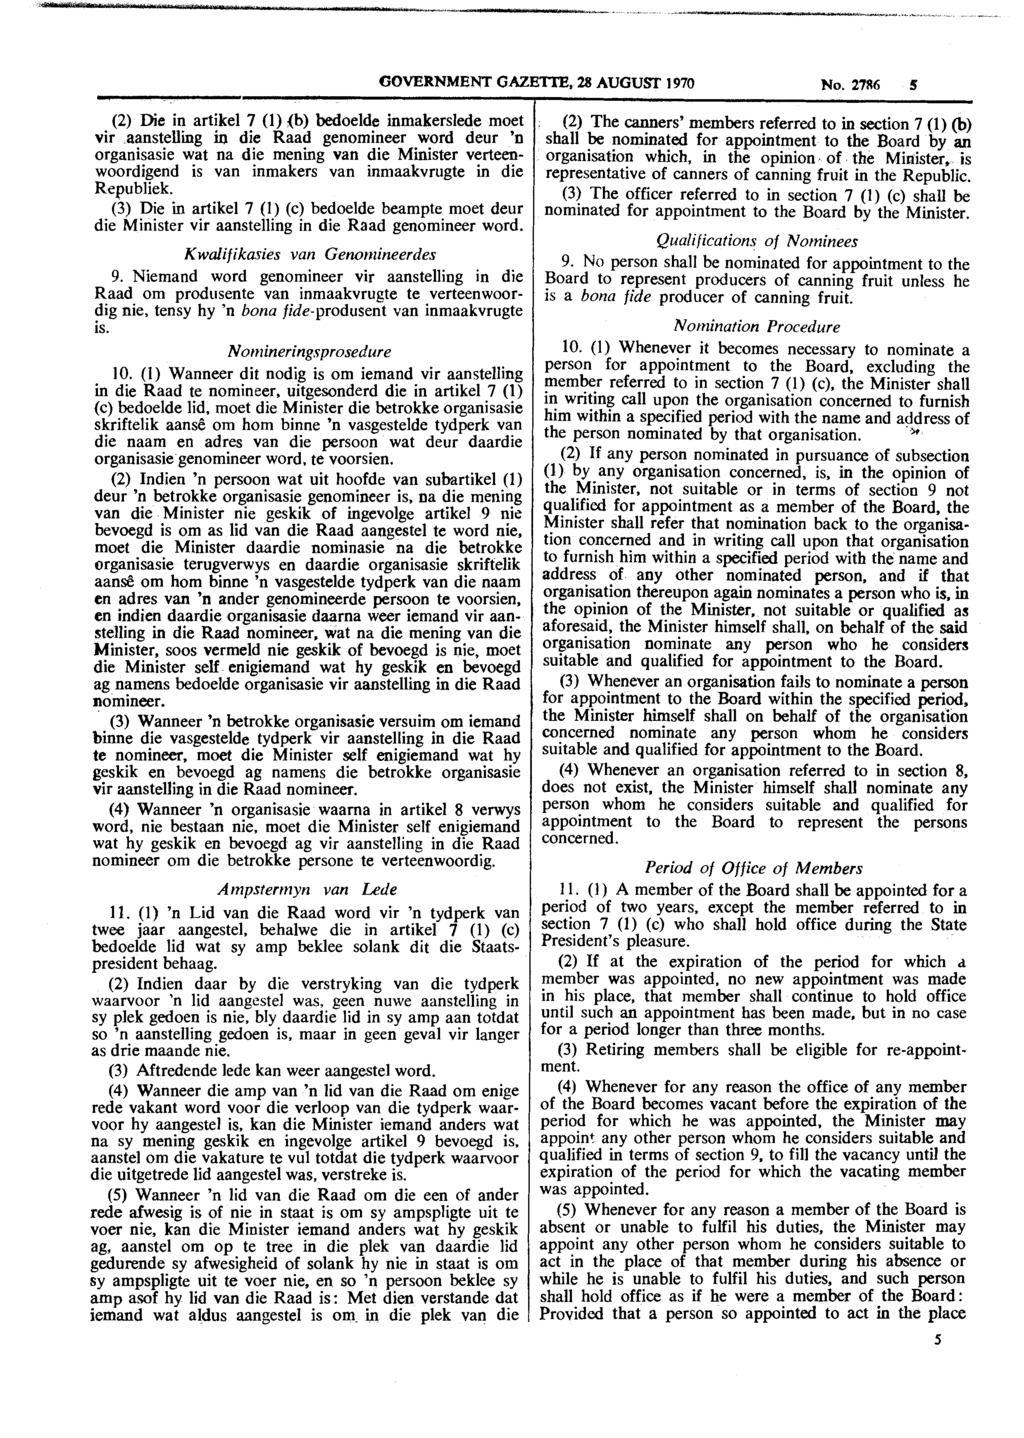 - -.-.-.. - - A Reproduced by Sabinet Online in terms of Government Printer s Copyright Authority No. 10505 dated 02 February 1998 GOVERNMENT GAZETIE, 28 AUGUST 1970 No.